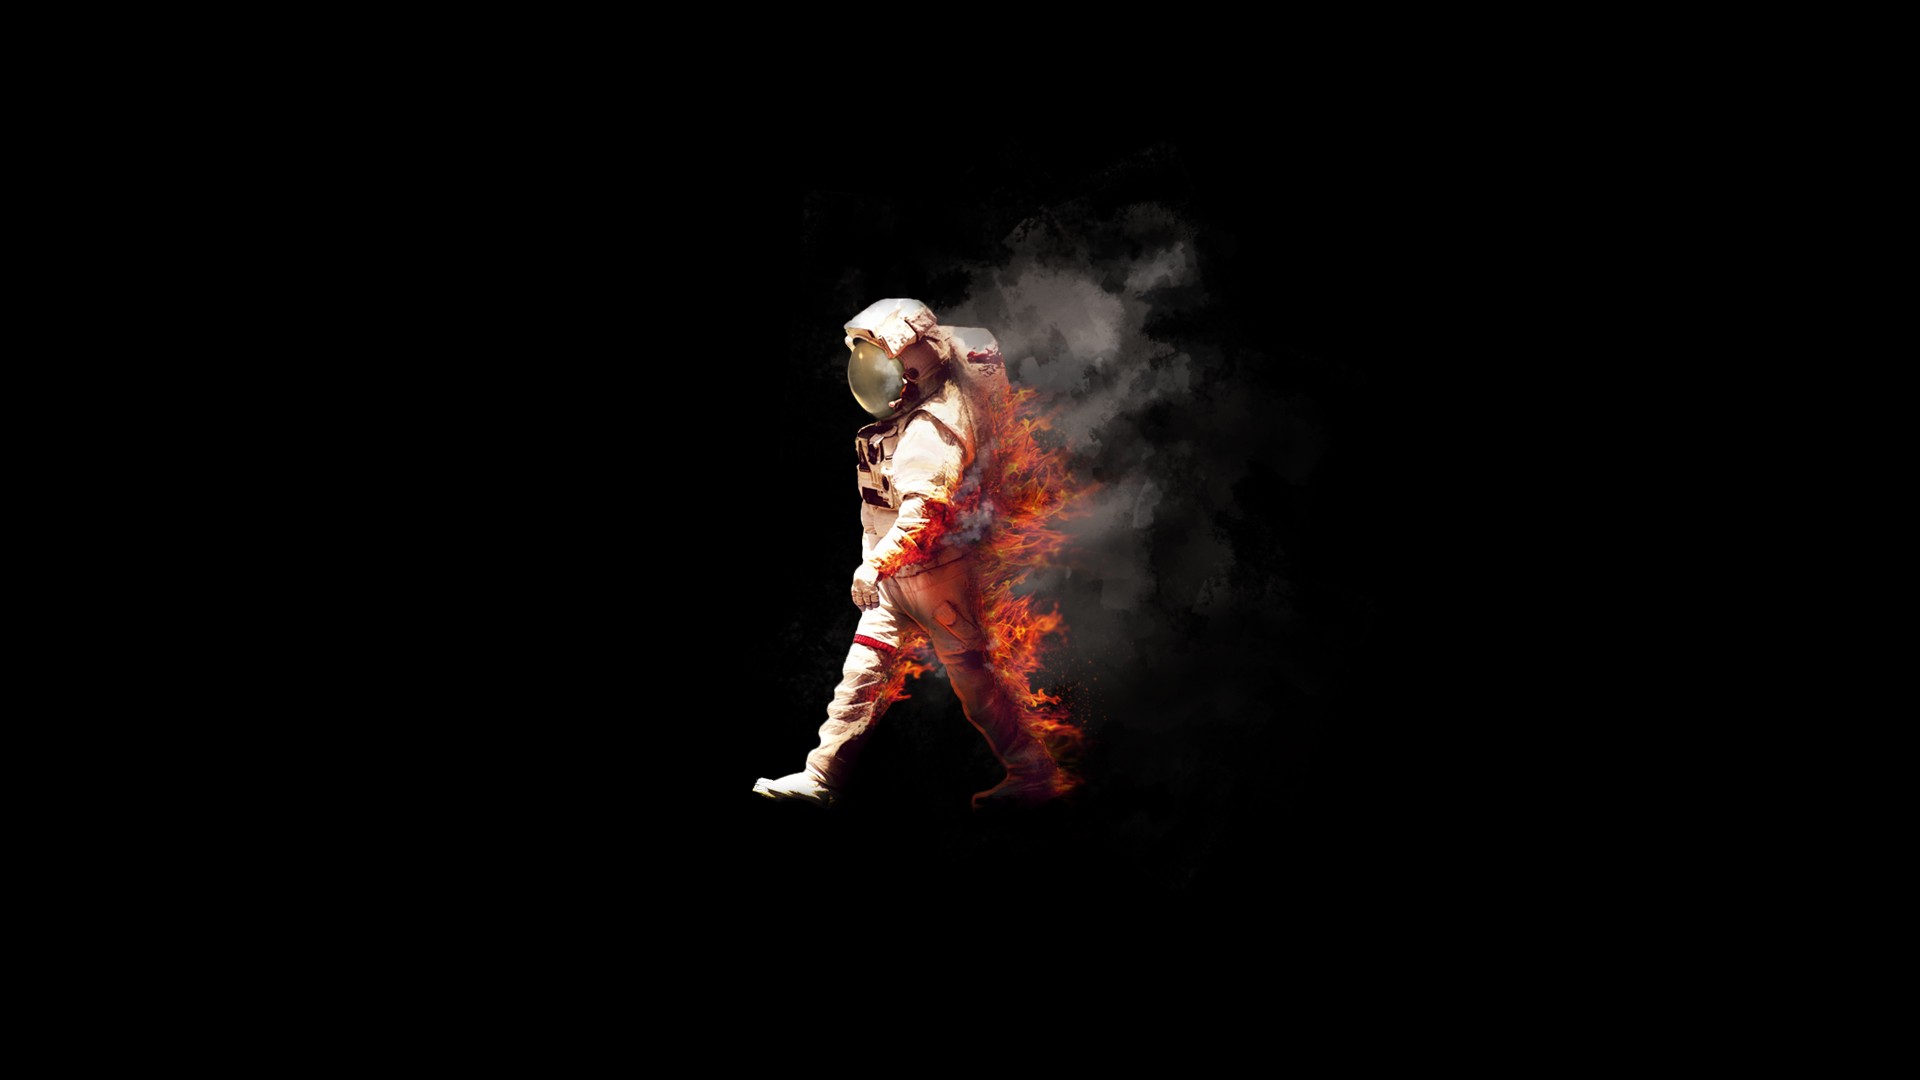 Astronaut Space Fire Burn Spacesuit NASA Minimalism Abstract Burning 1920x1080